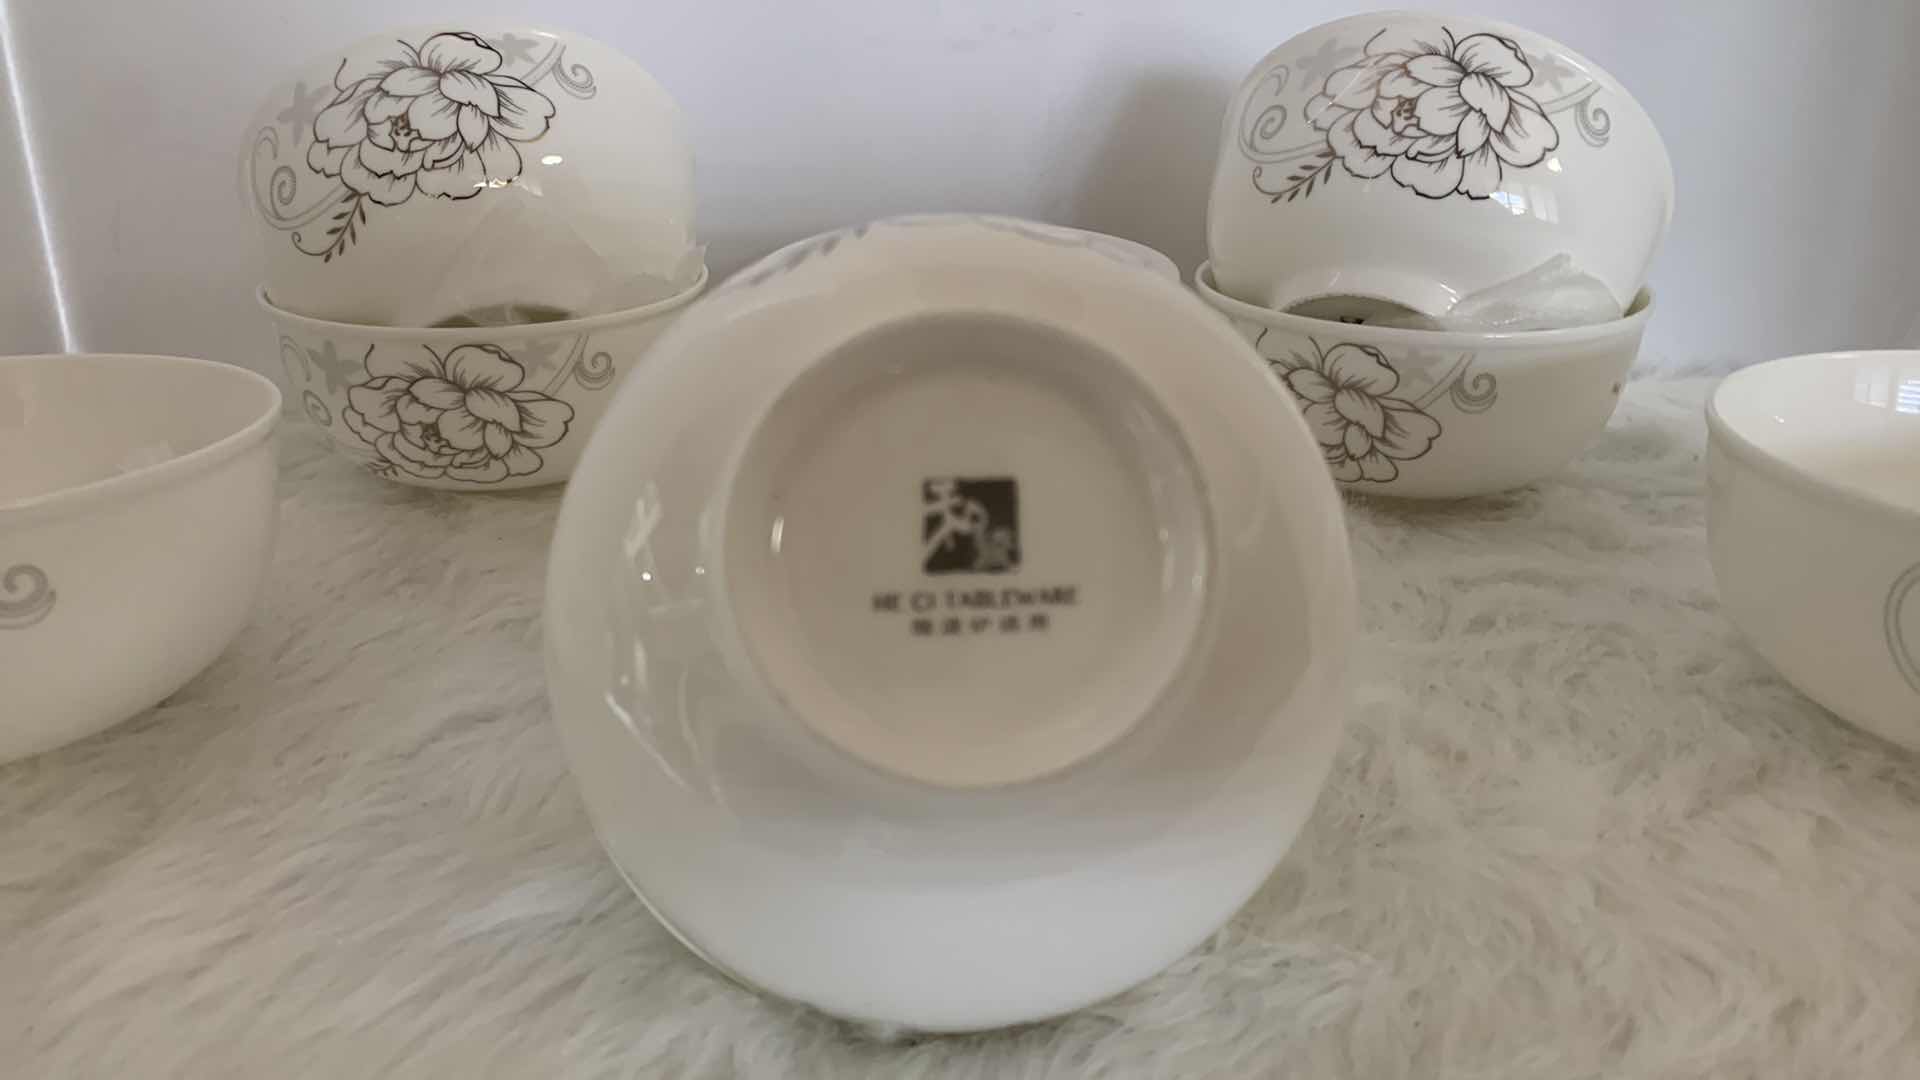 Photo 4 of 9 - SMALL WHITE PORCELAIN DESSERT BOWLS WITH FLOWER